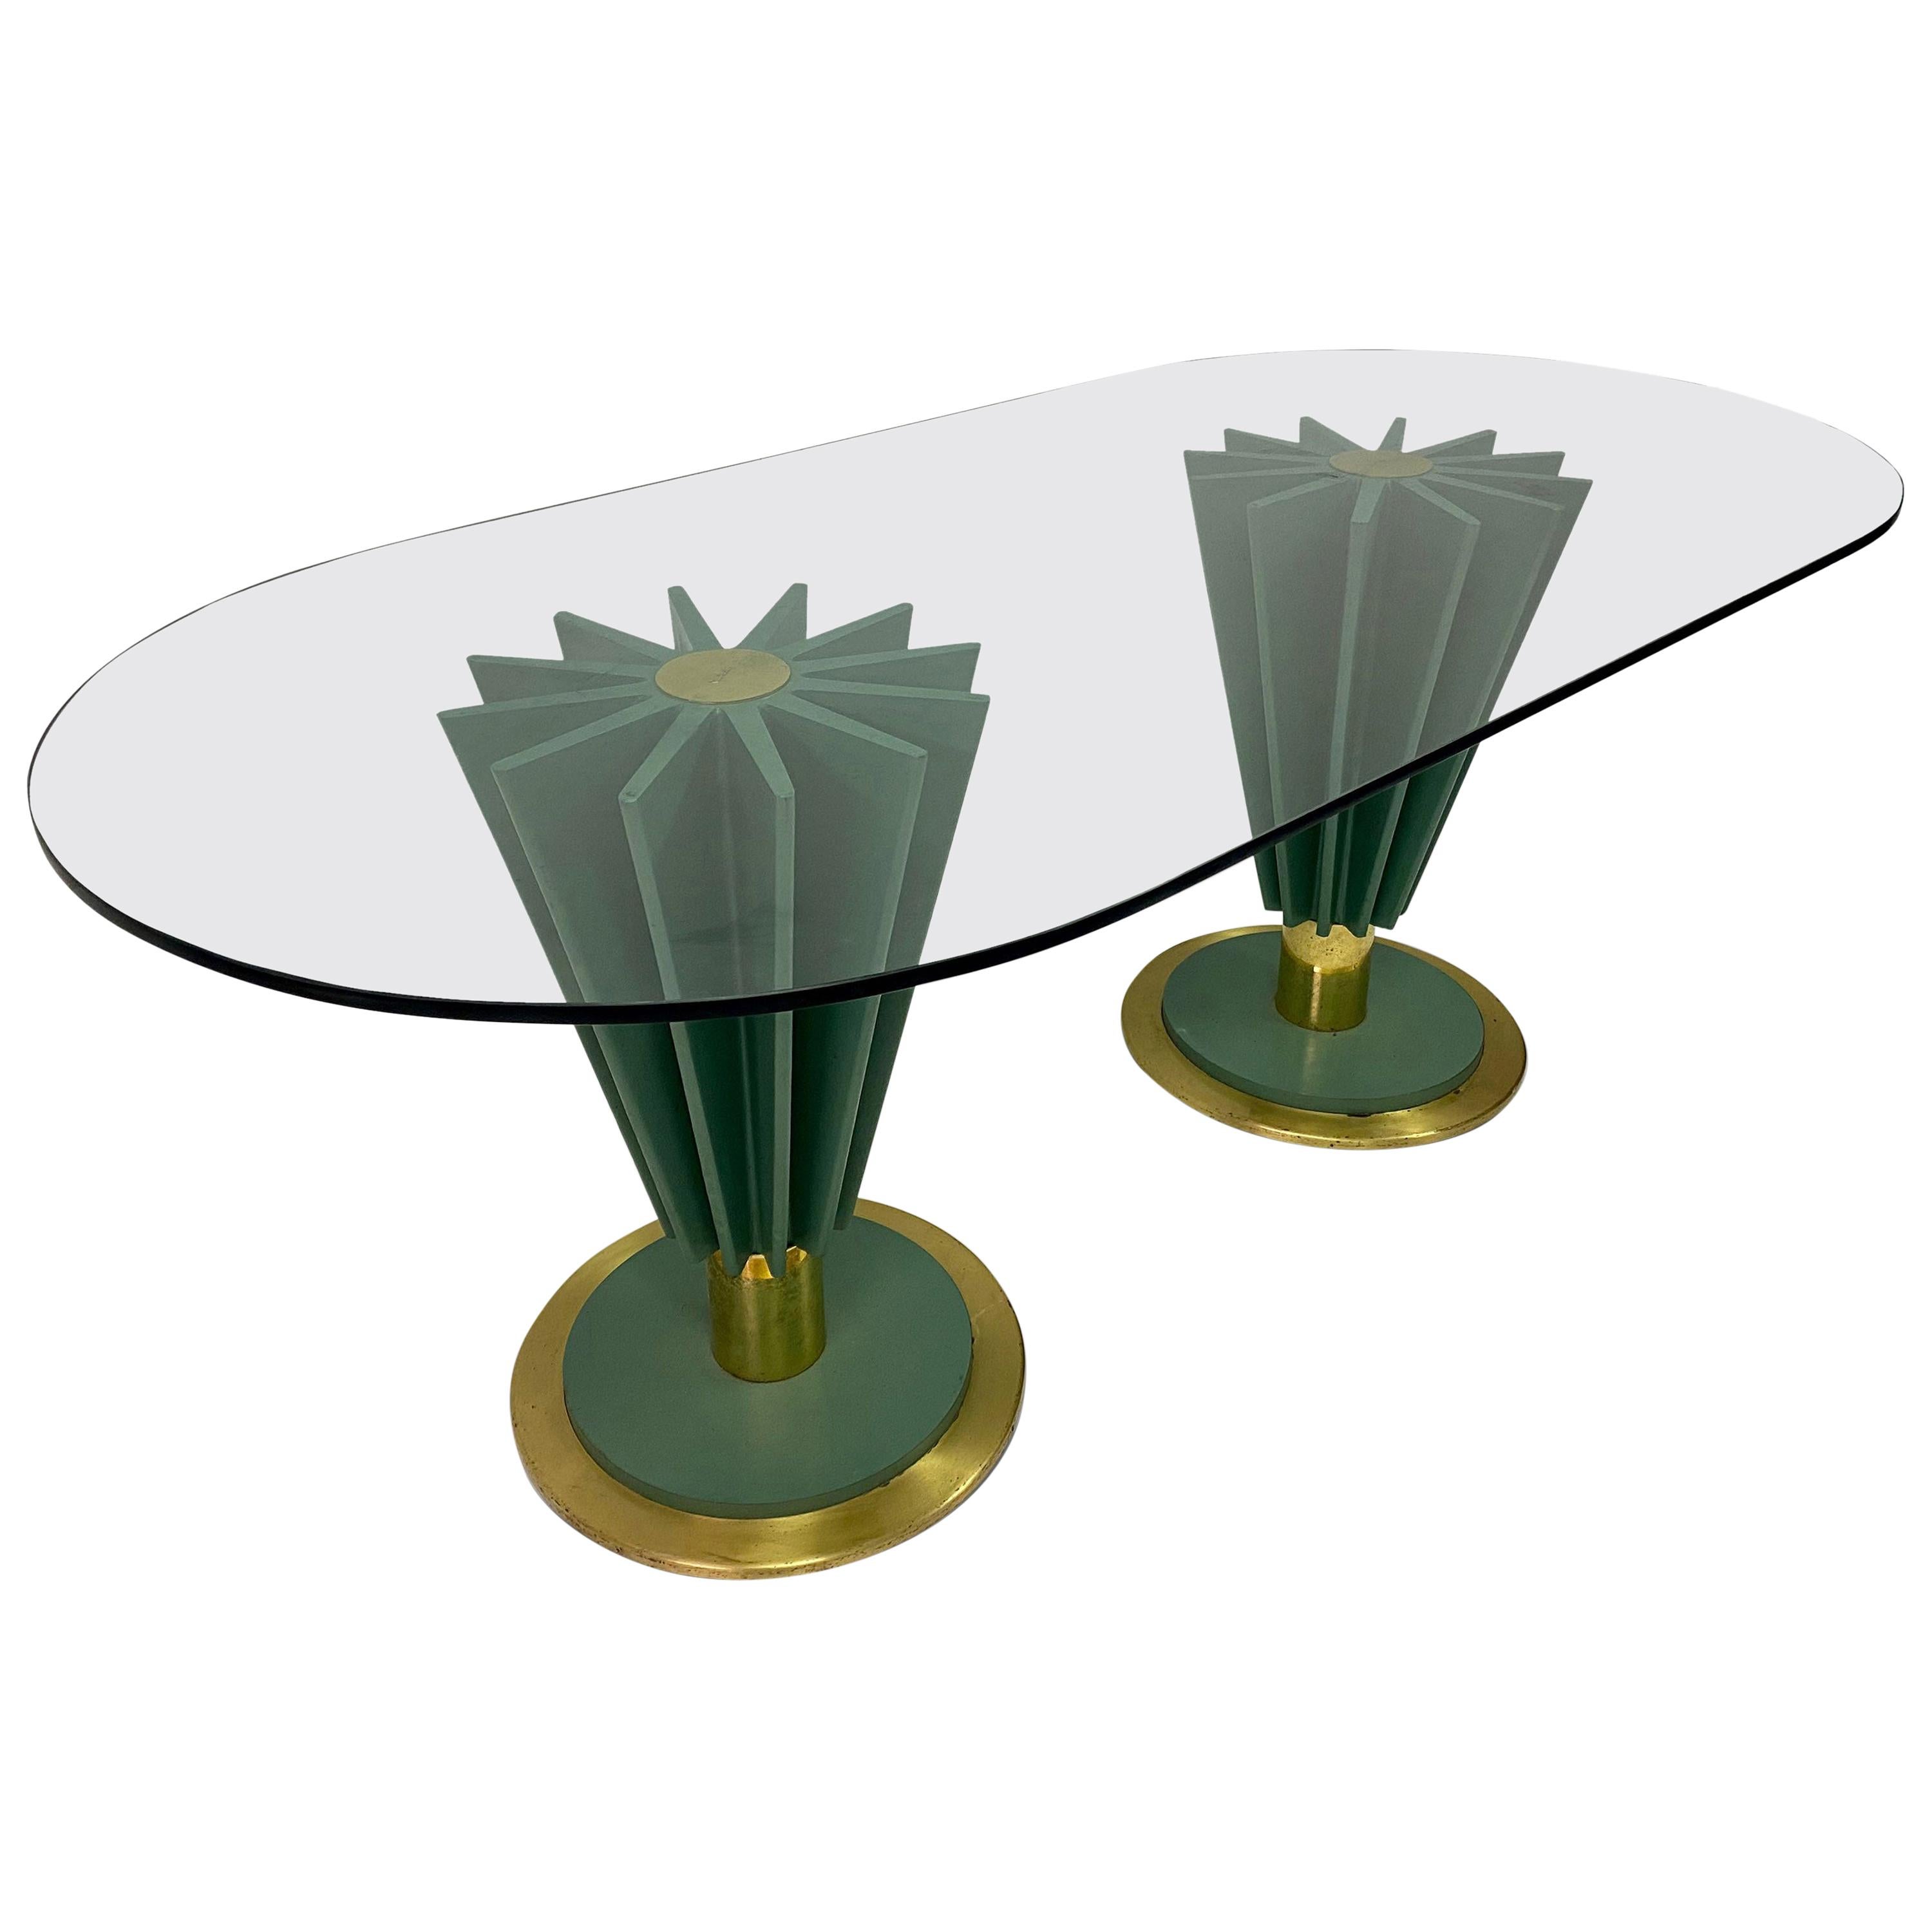 1970s Italian Brass and Iron Dining Table by Pierre Cardin